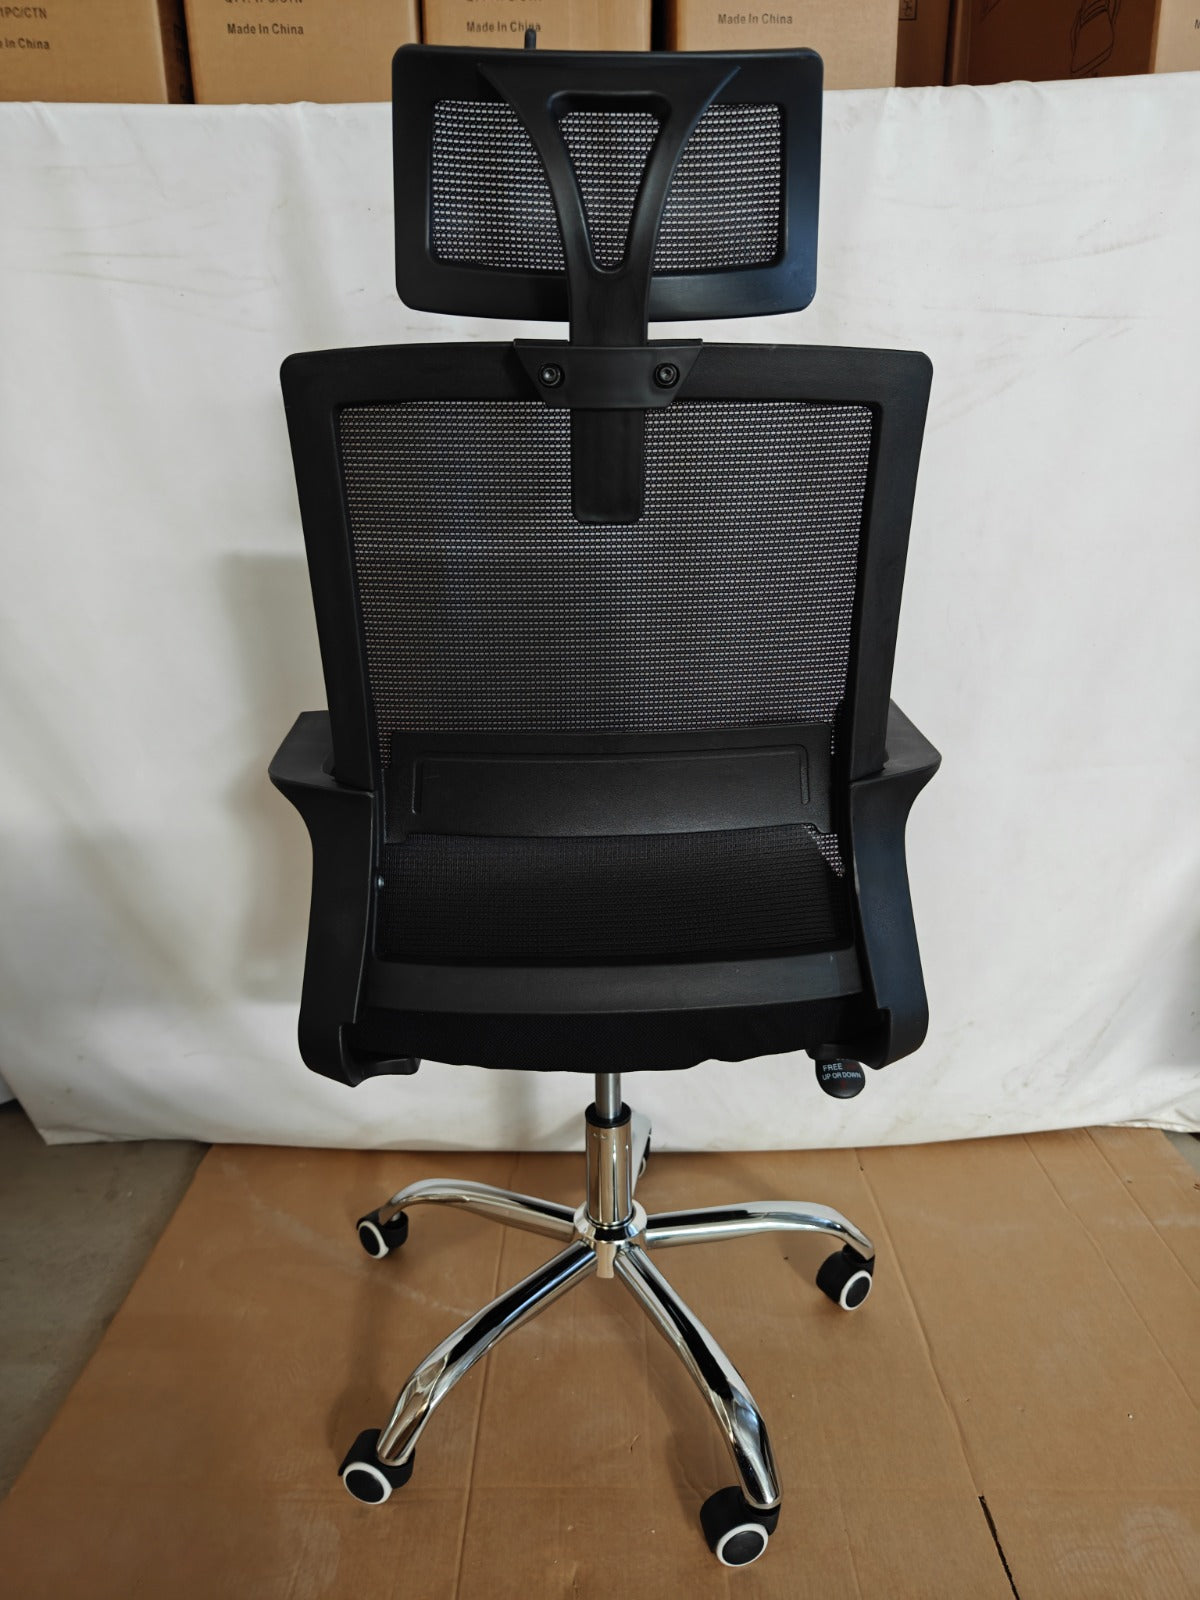 Office Chair Brand New Ergonomic Headrest Mesh Office Chair – Lumbar support – Breathable – Cost-effective - comfortable